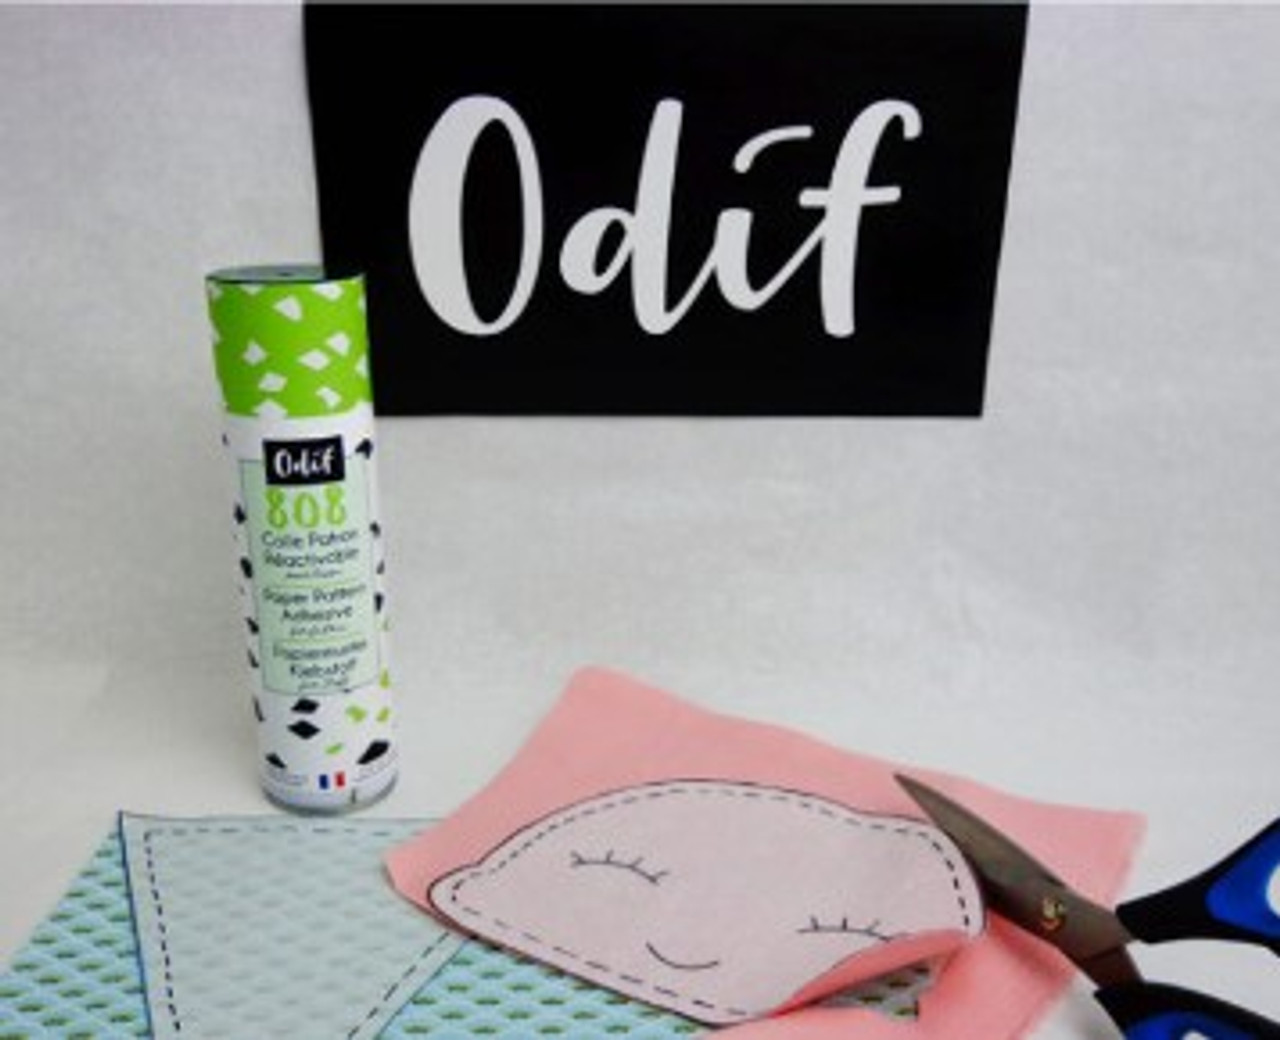 Odif 808 Paper Pattern Reactivable Spray Adhesive